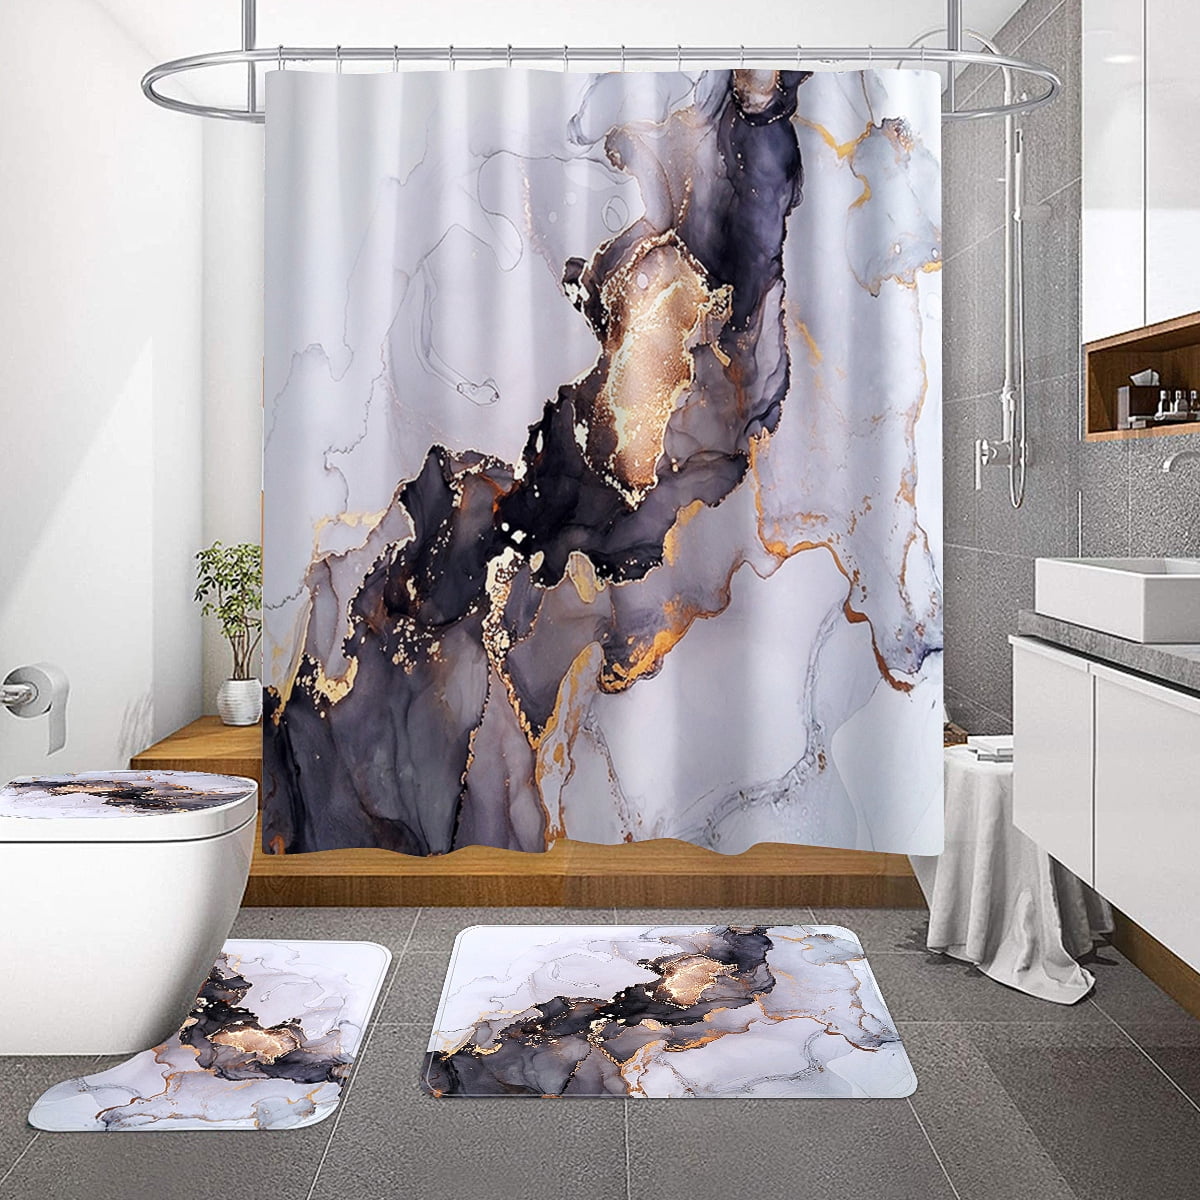 Gibelle 4 Pcs Bathroom Shower Curtain Set with Non-Slip Rugs, Toilet Lid  Cover and Bath